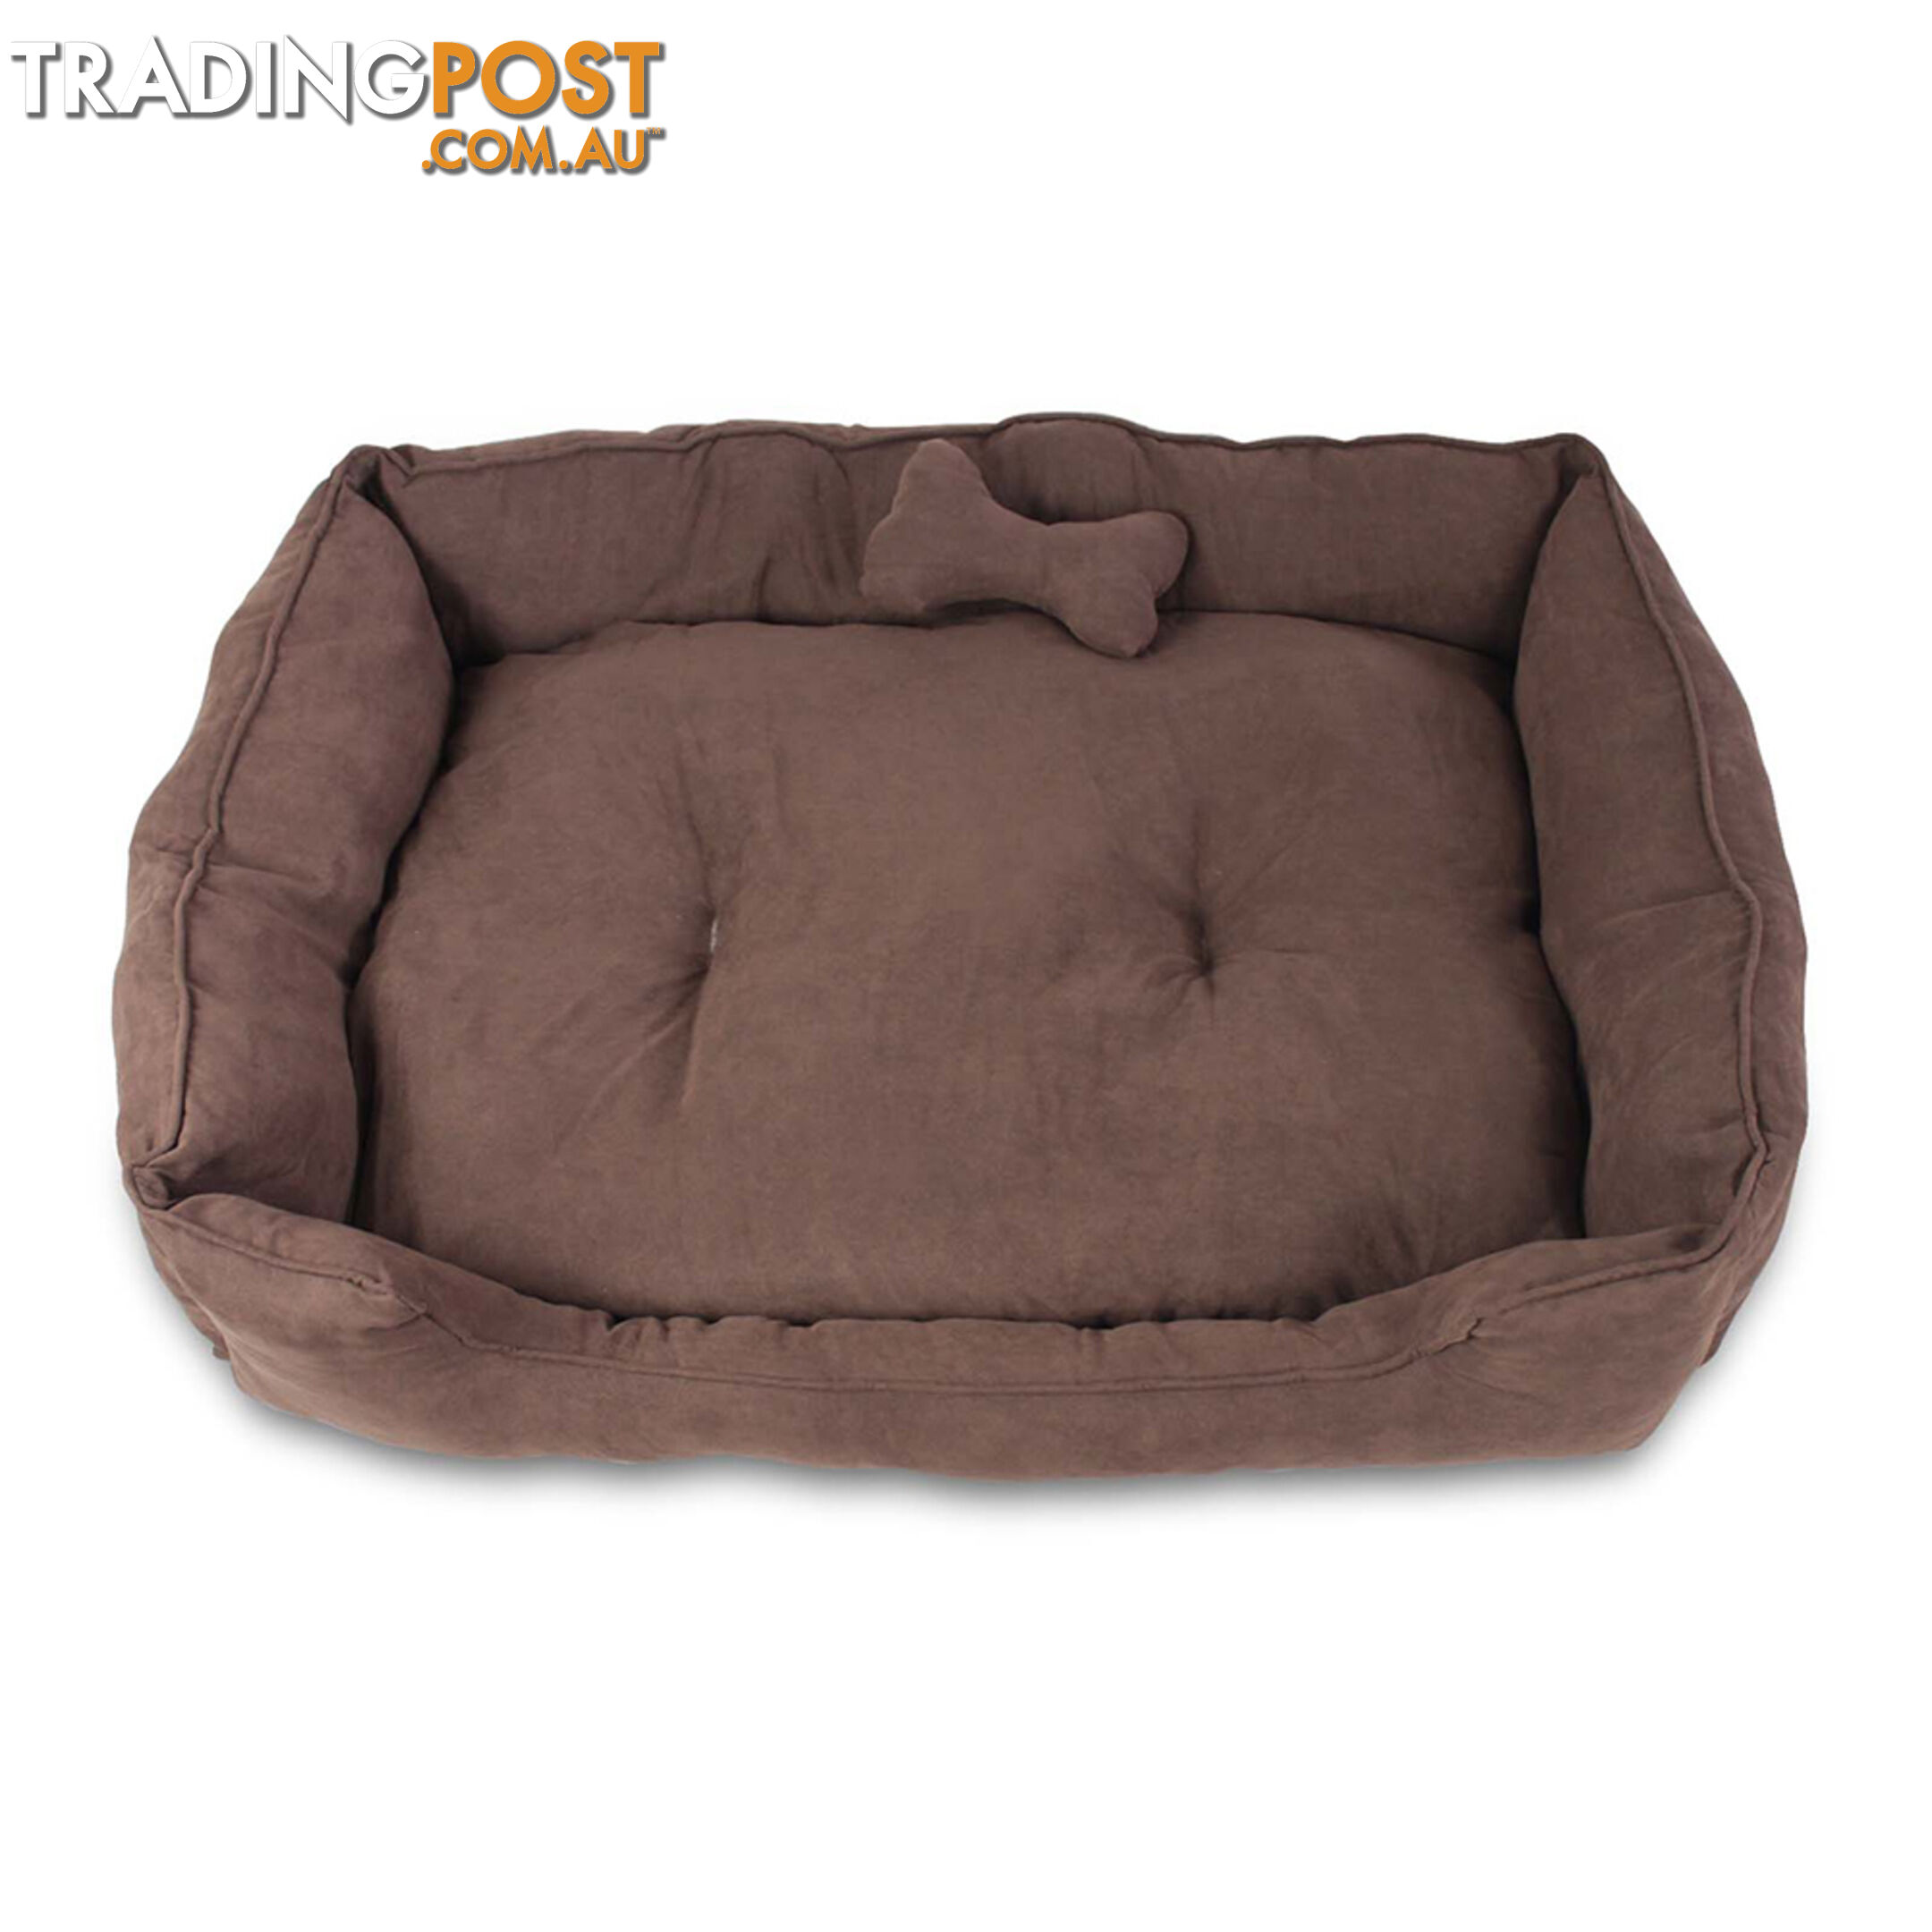 Deluxe Faux Suede Dog Bed Pet Cat Puppy Washable Soft Cushion Mat Basket Large